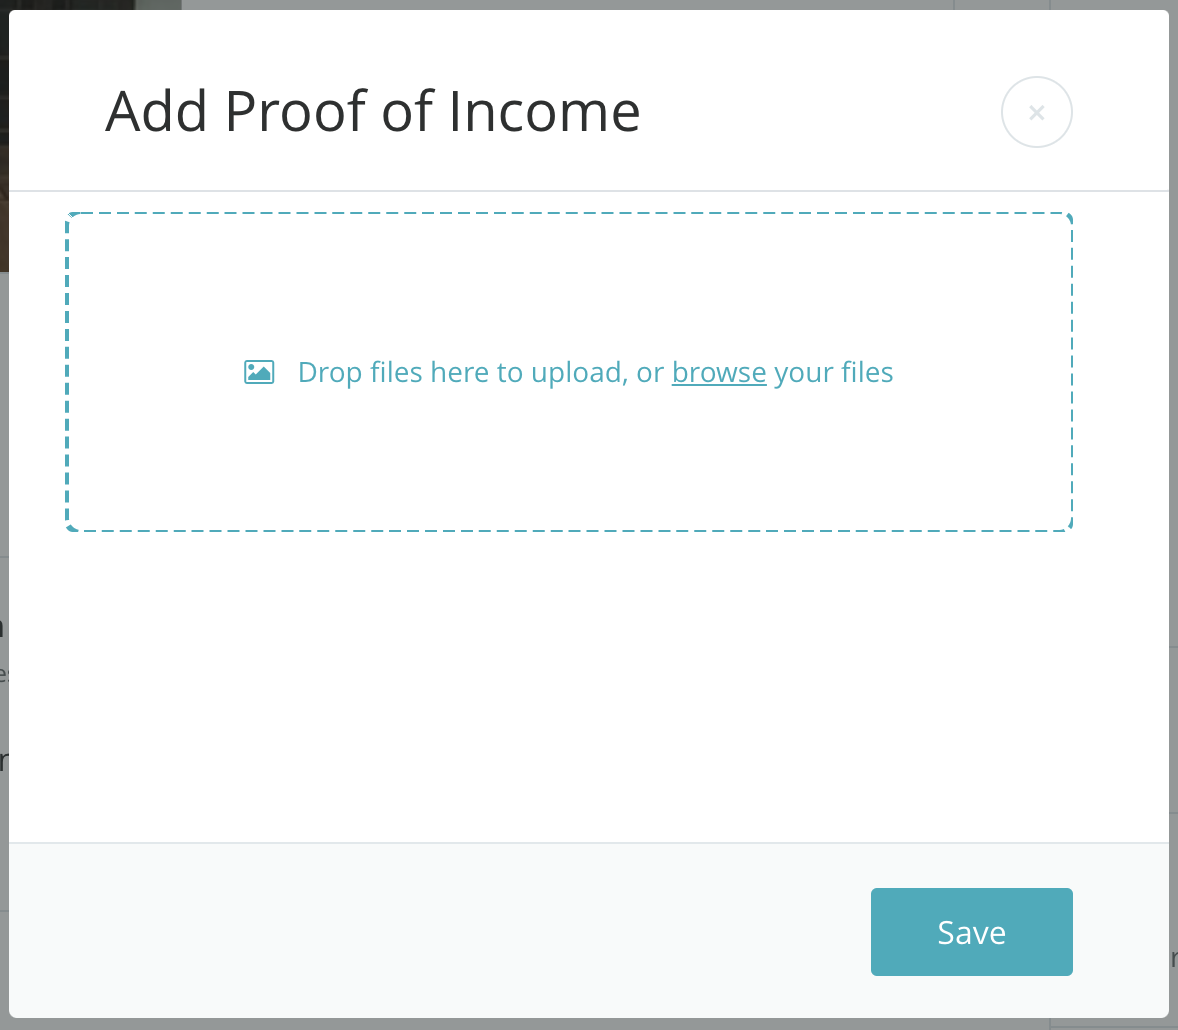 Add_Proof_of_Income_modal.png